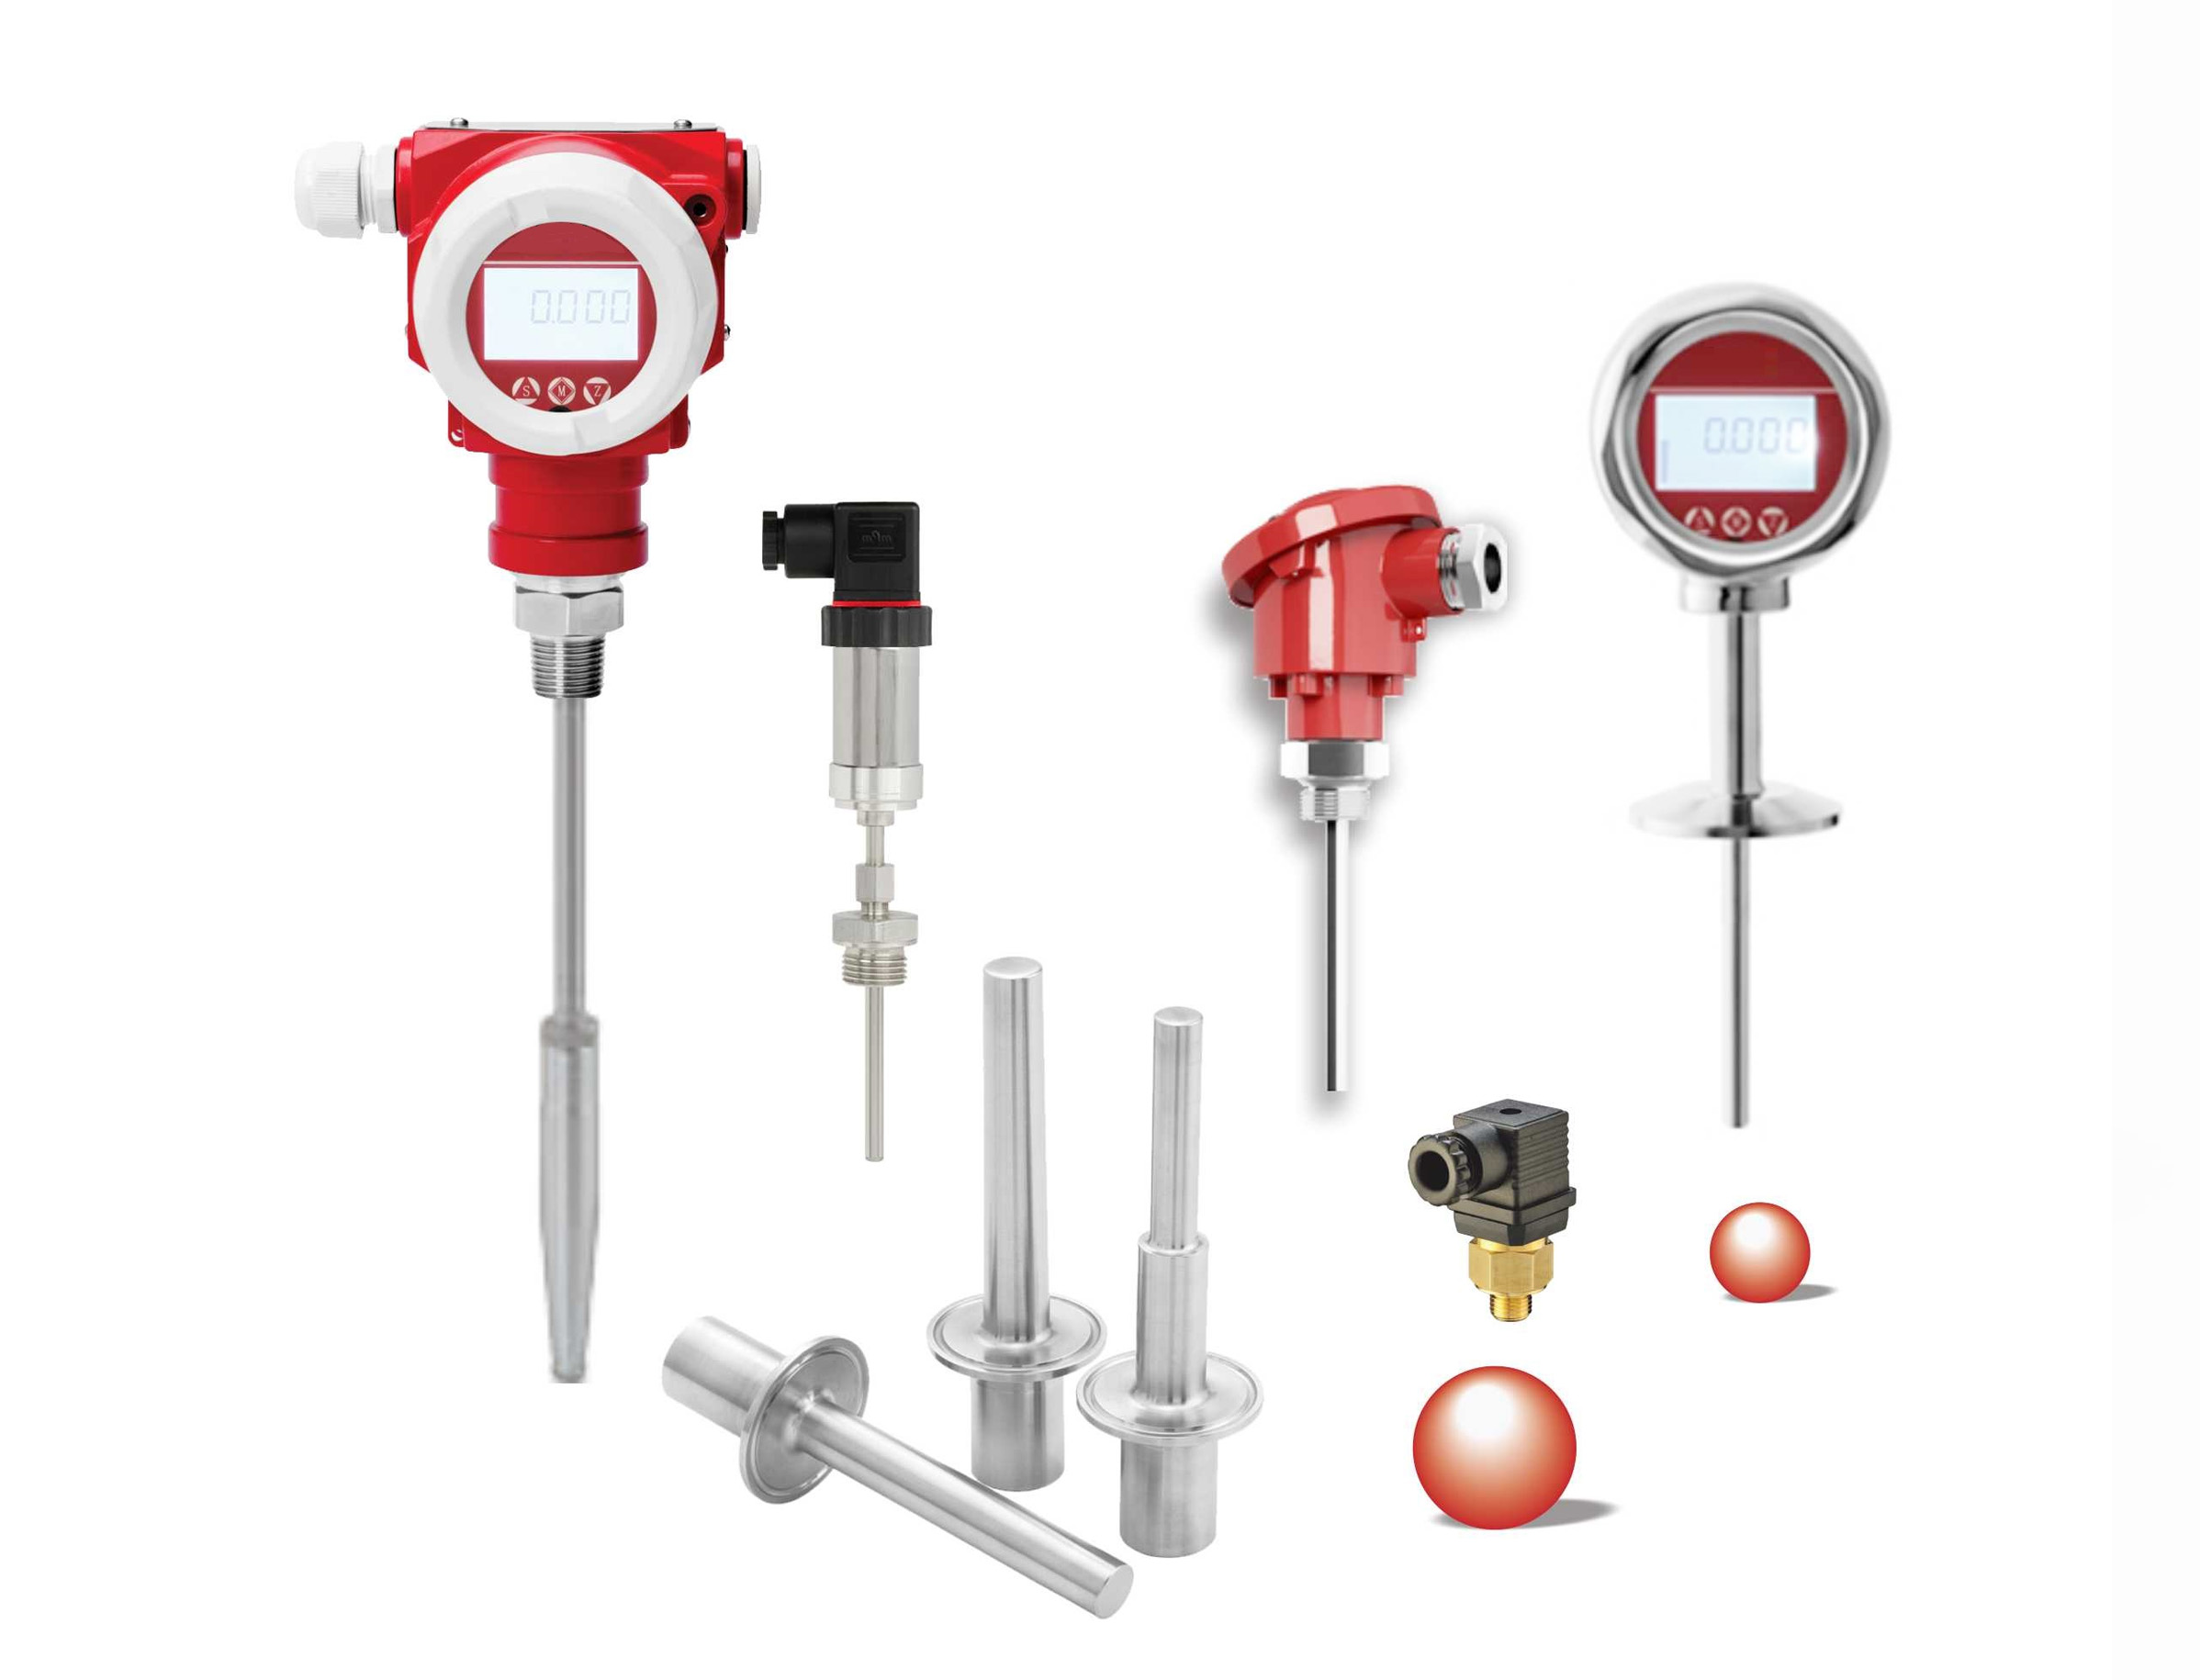 Temperature sensors and controllers